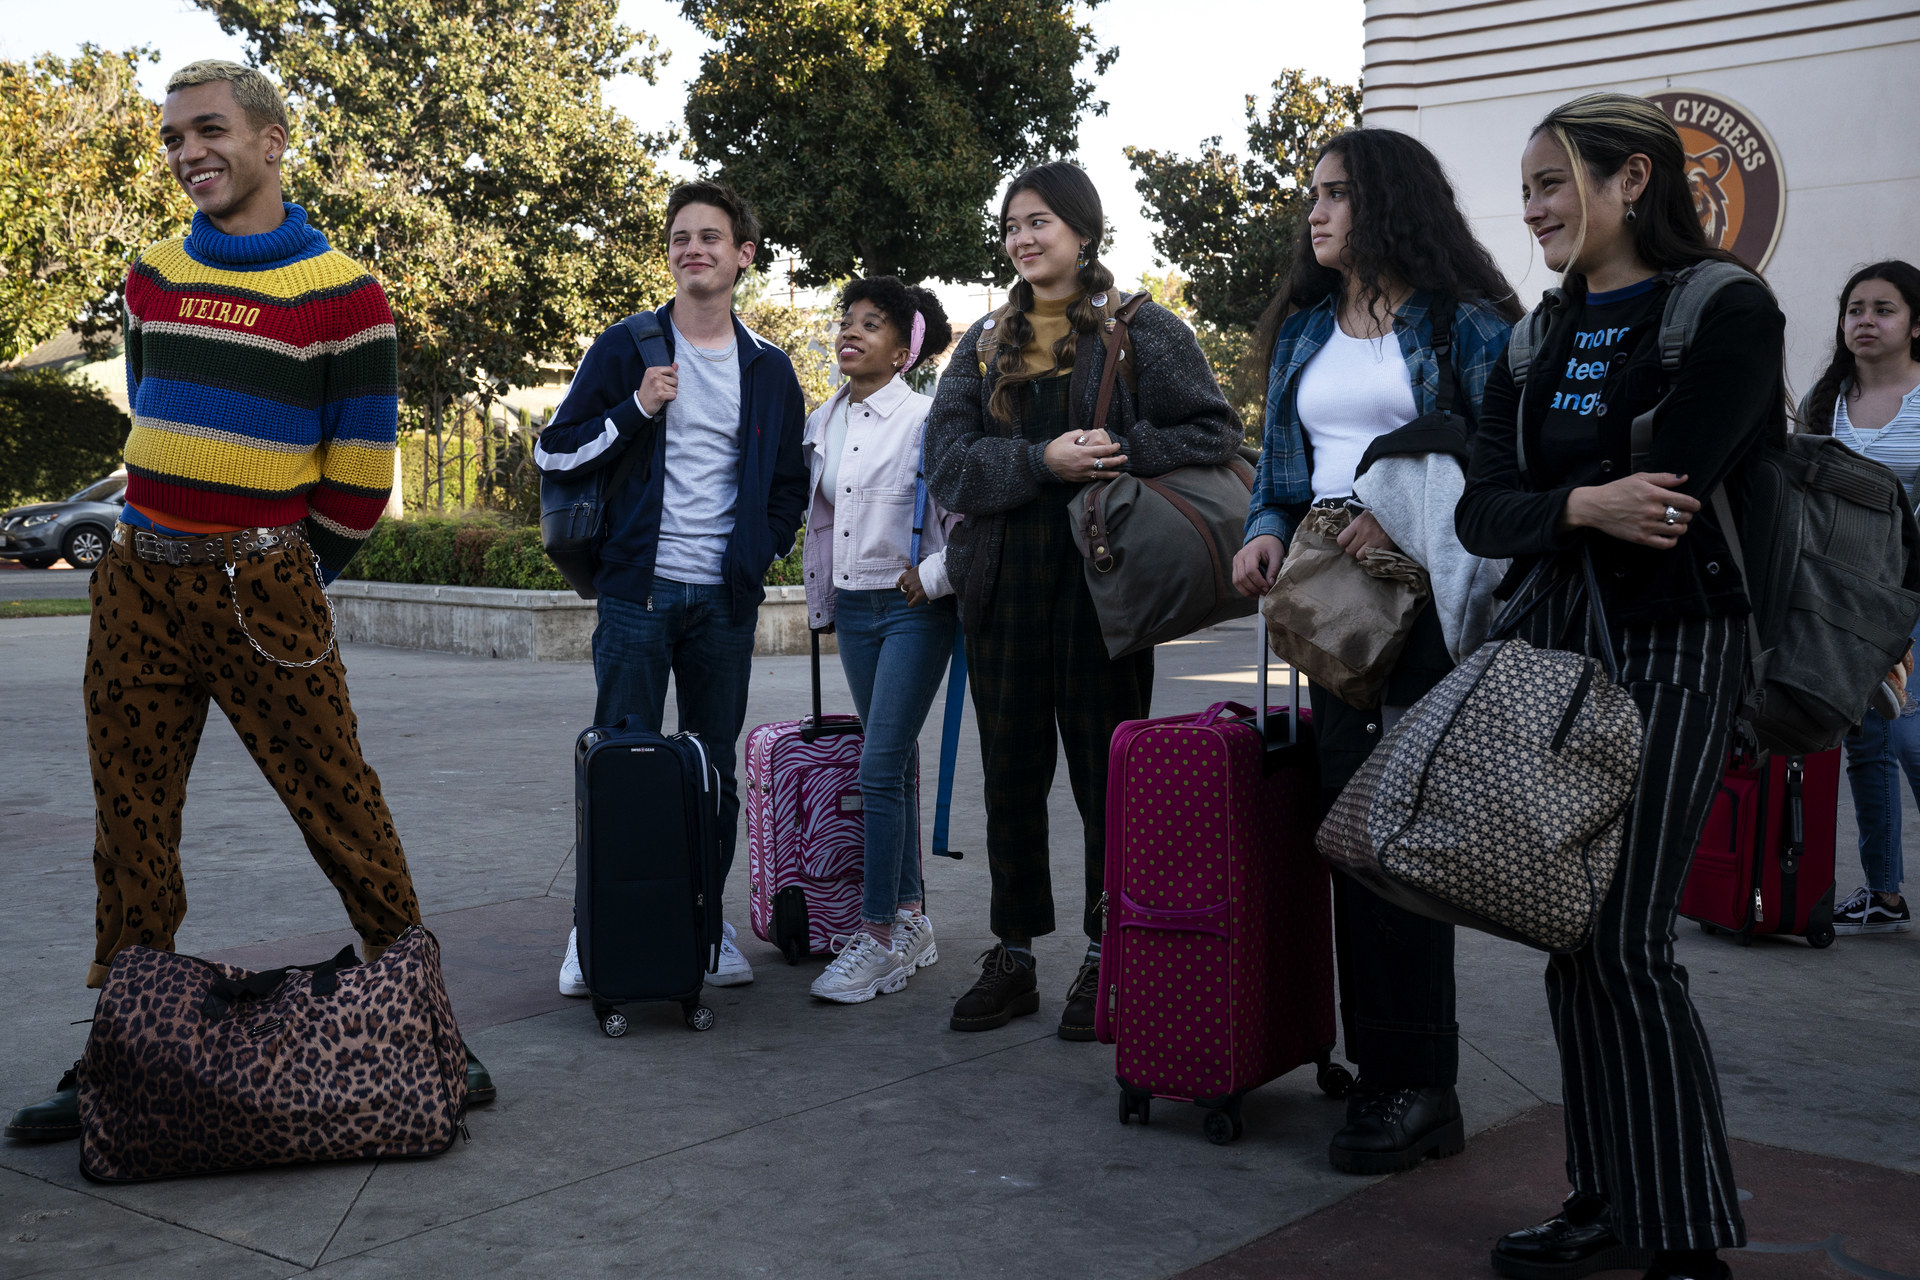 Students prepare to get on a school bus with their luggage and bags. 